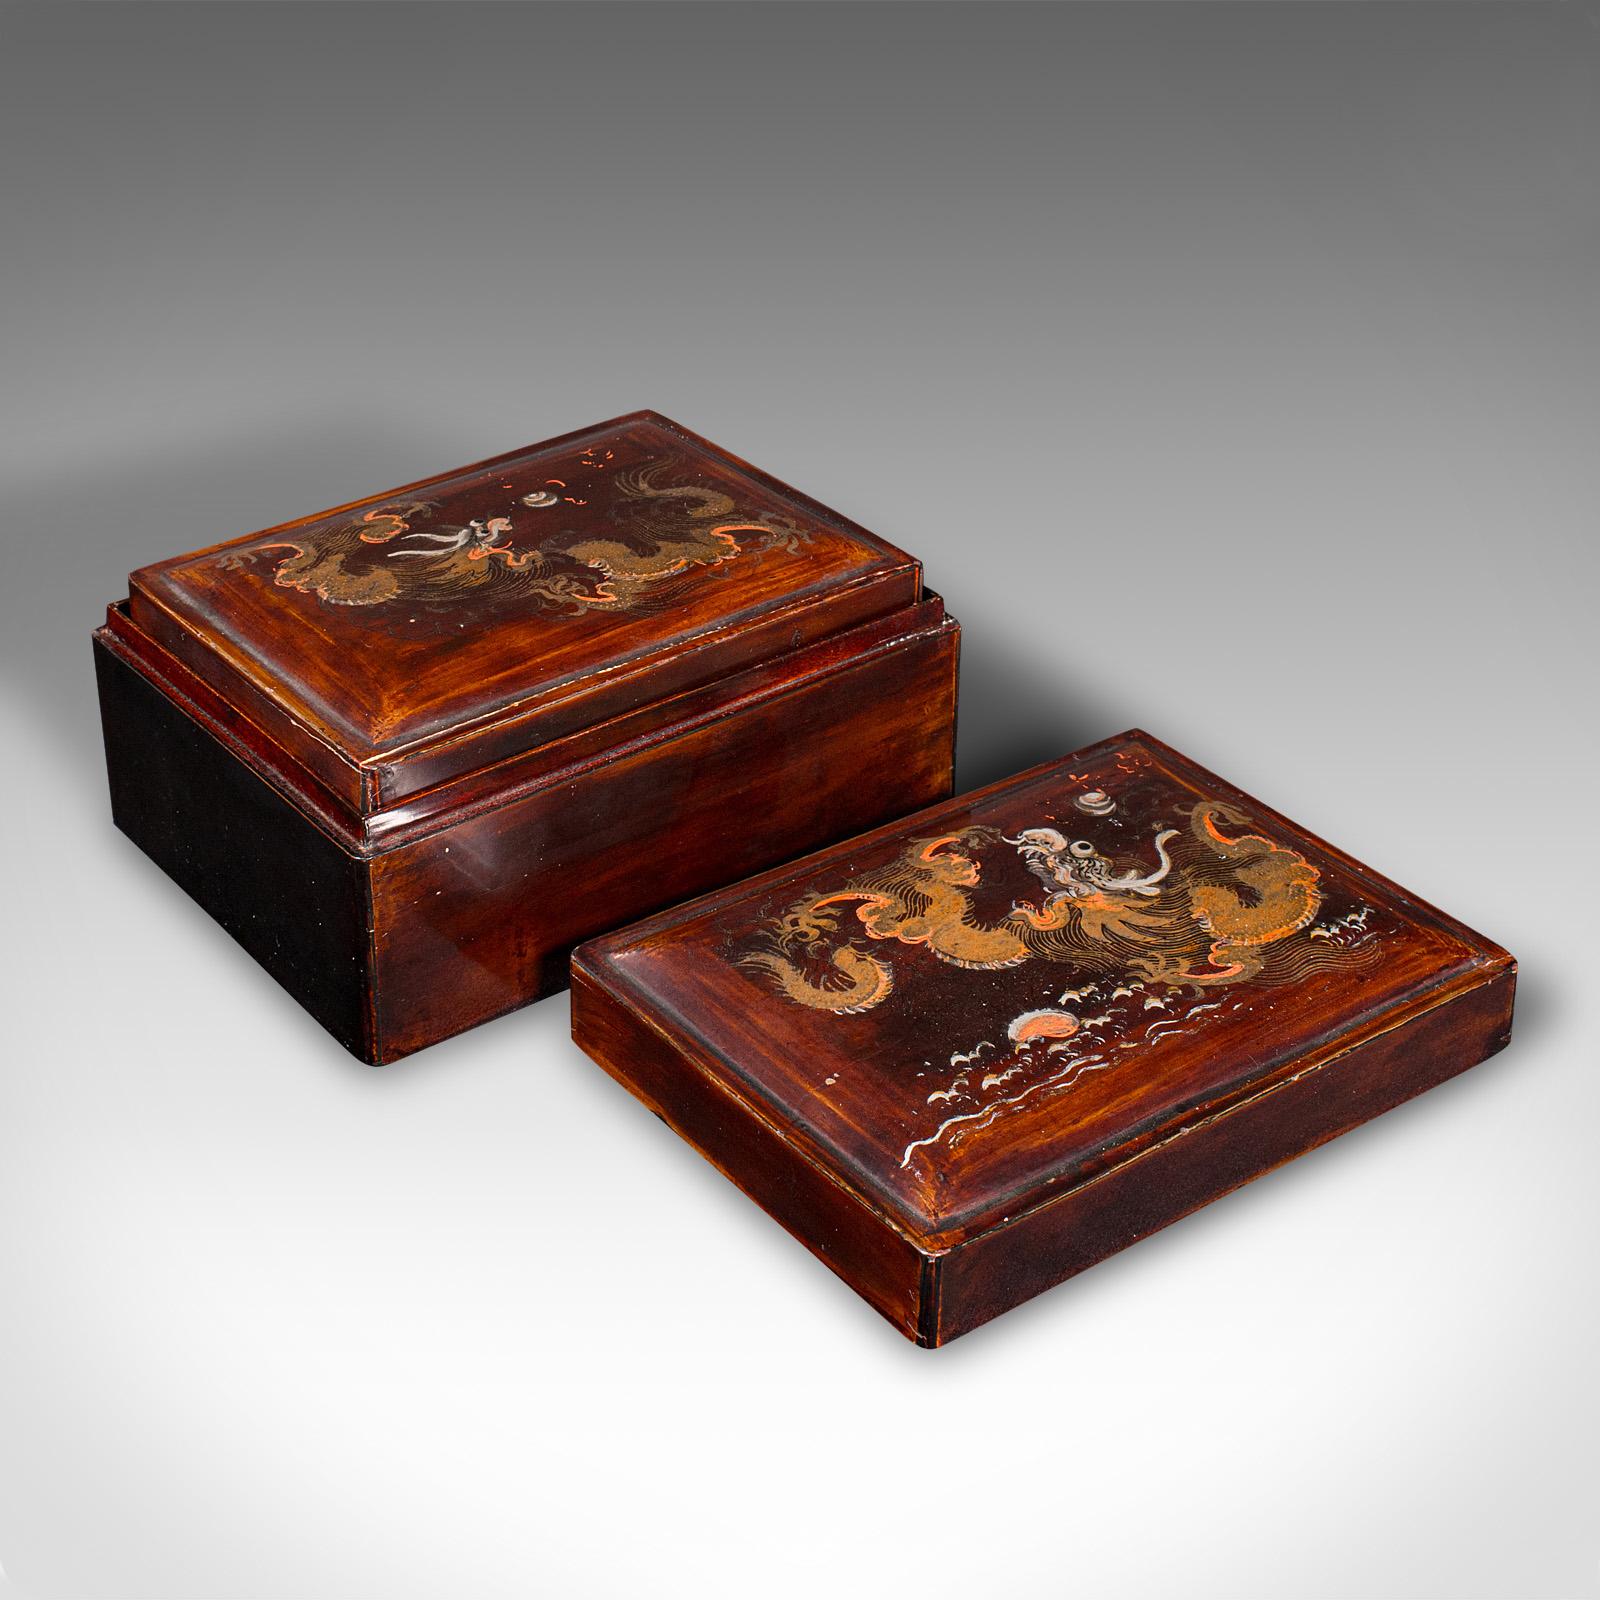 This is a set of 4 vintage nesting boxes. A Japanese, lacquered quartet of small storage boxes with handpainted decor, dating to the Art Deco period, circa 1930.

Fascinating quartet, with a neatly nesting form
Displaying a desirable aged patina and